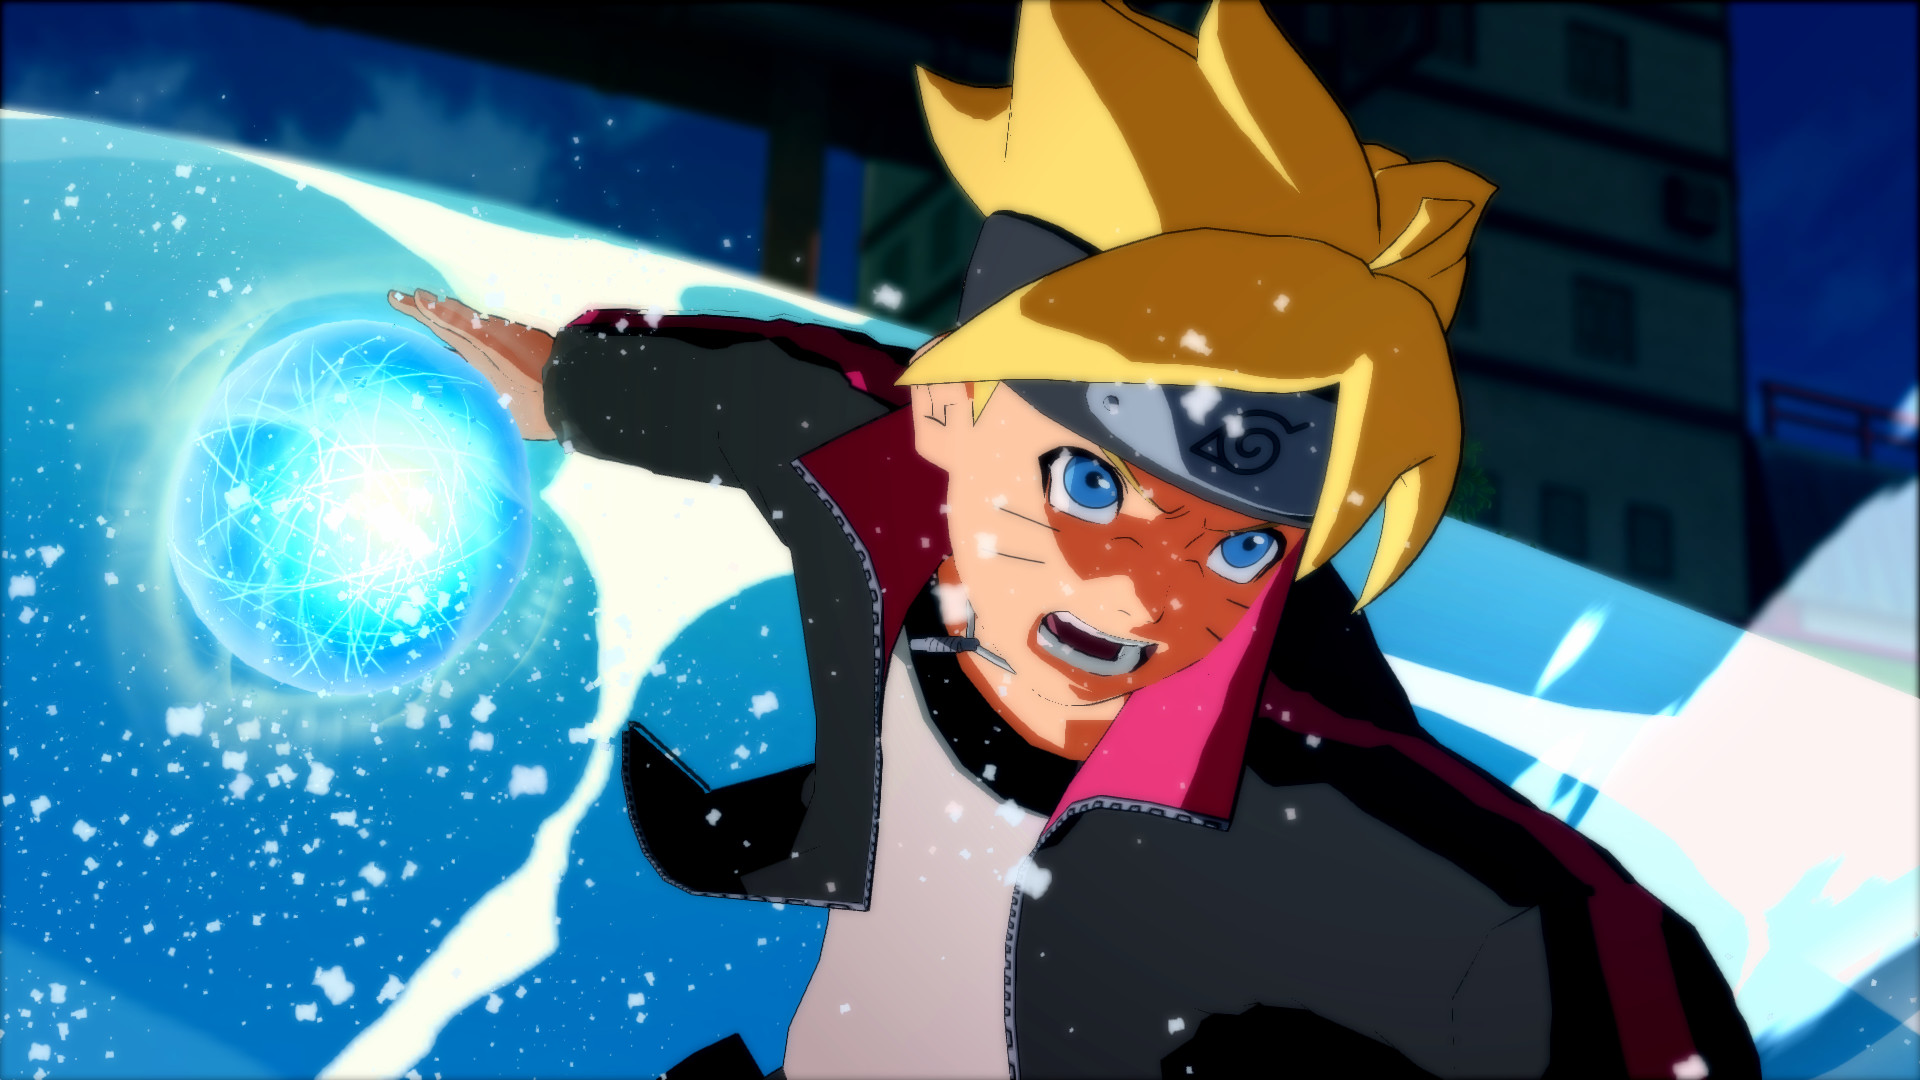 NARUTO SHIPPUDEN: UNS 4 ROAD TO BORUTO NEXT GENERATIONS Pack on Steam